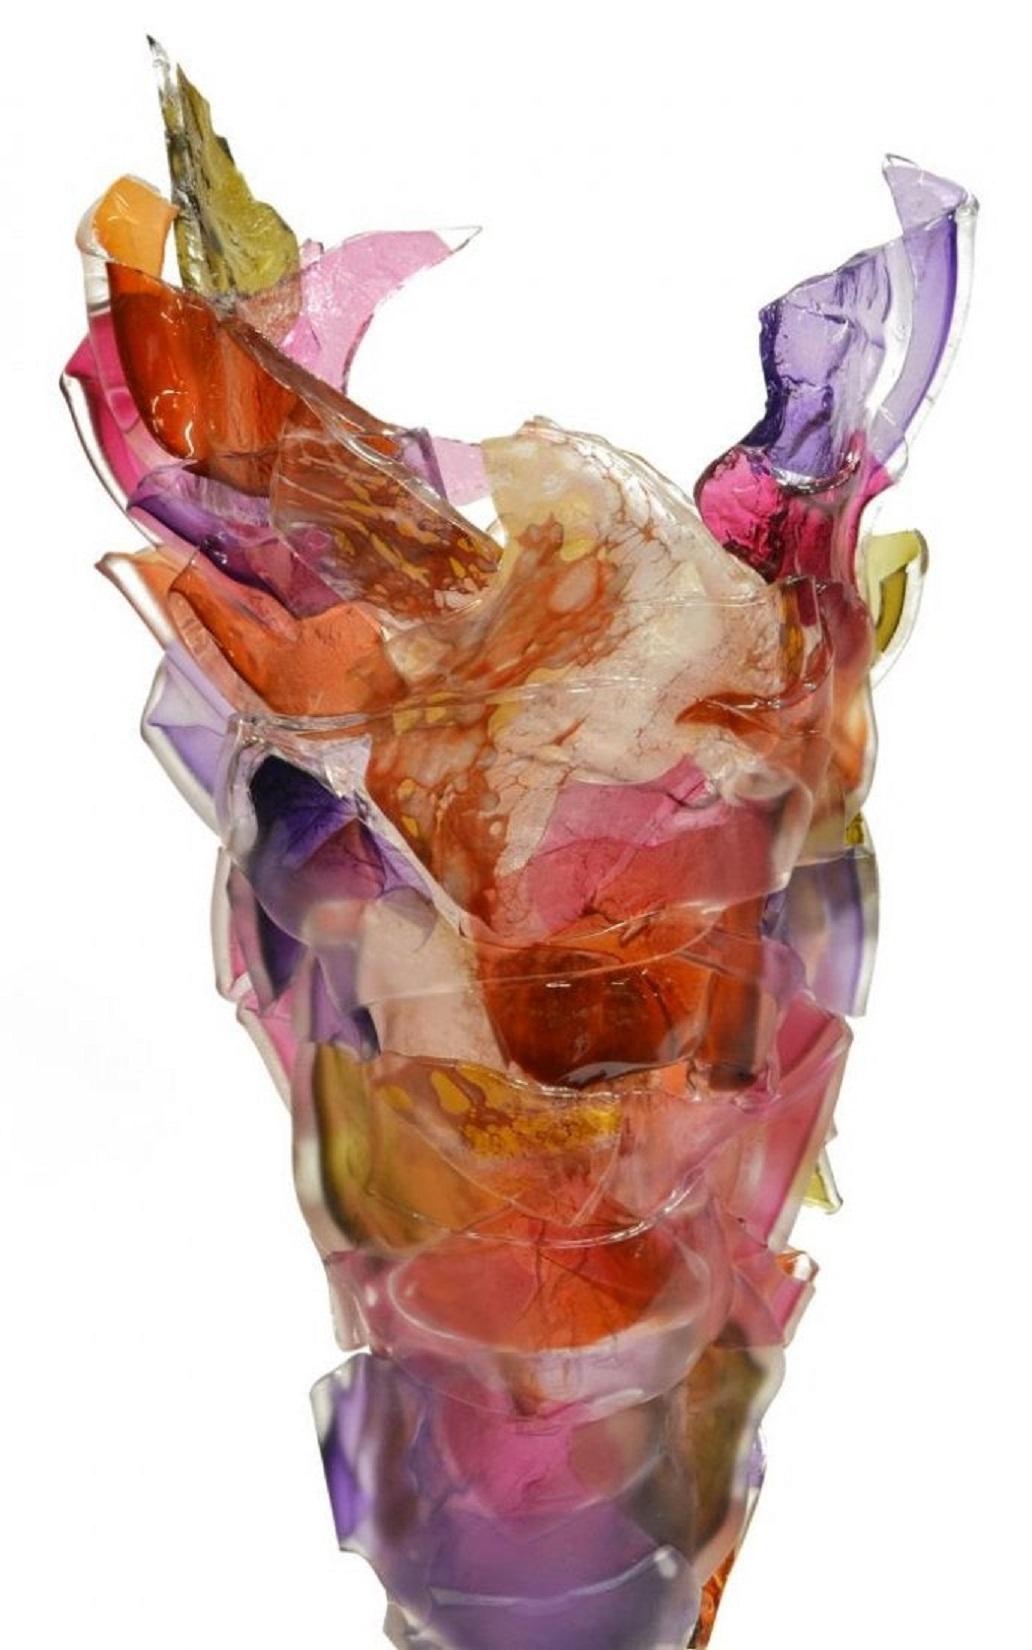 Modern colorful and bright art glass sculpture by Caleb Nichols, American, 21st century. 

Light and dark purple, pale and bright pink, orange, white, green, red - all these colors of frosted and clear blown glass pieces were combined together in